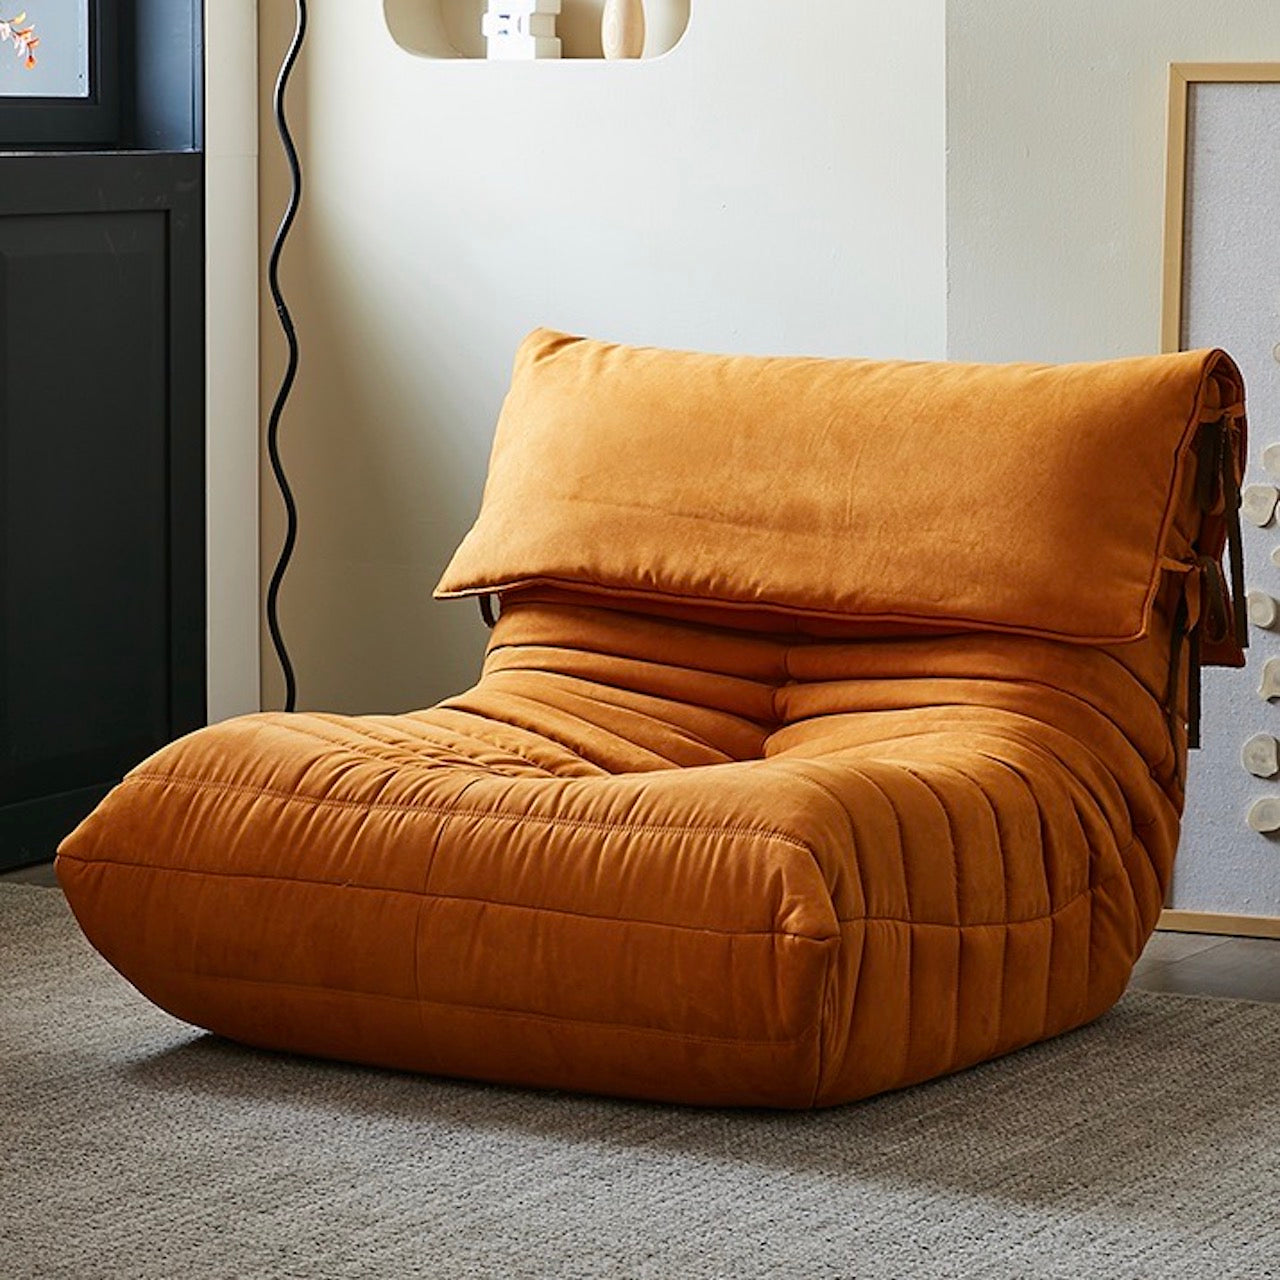 Burnt Orange Caterpillar Single Sofa Chair in Soft Suede and Faux Fur